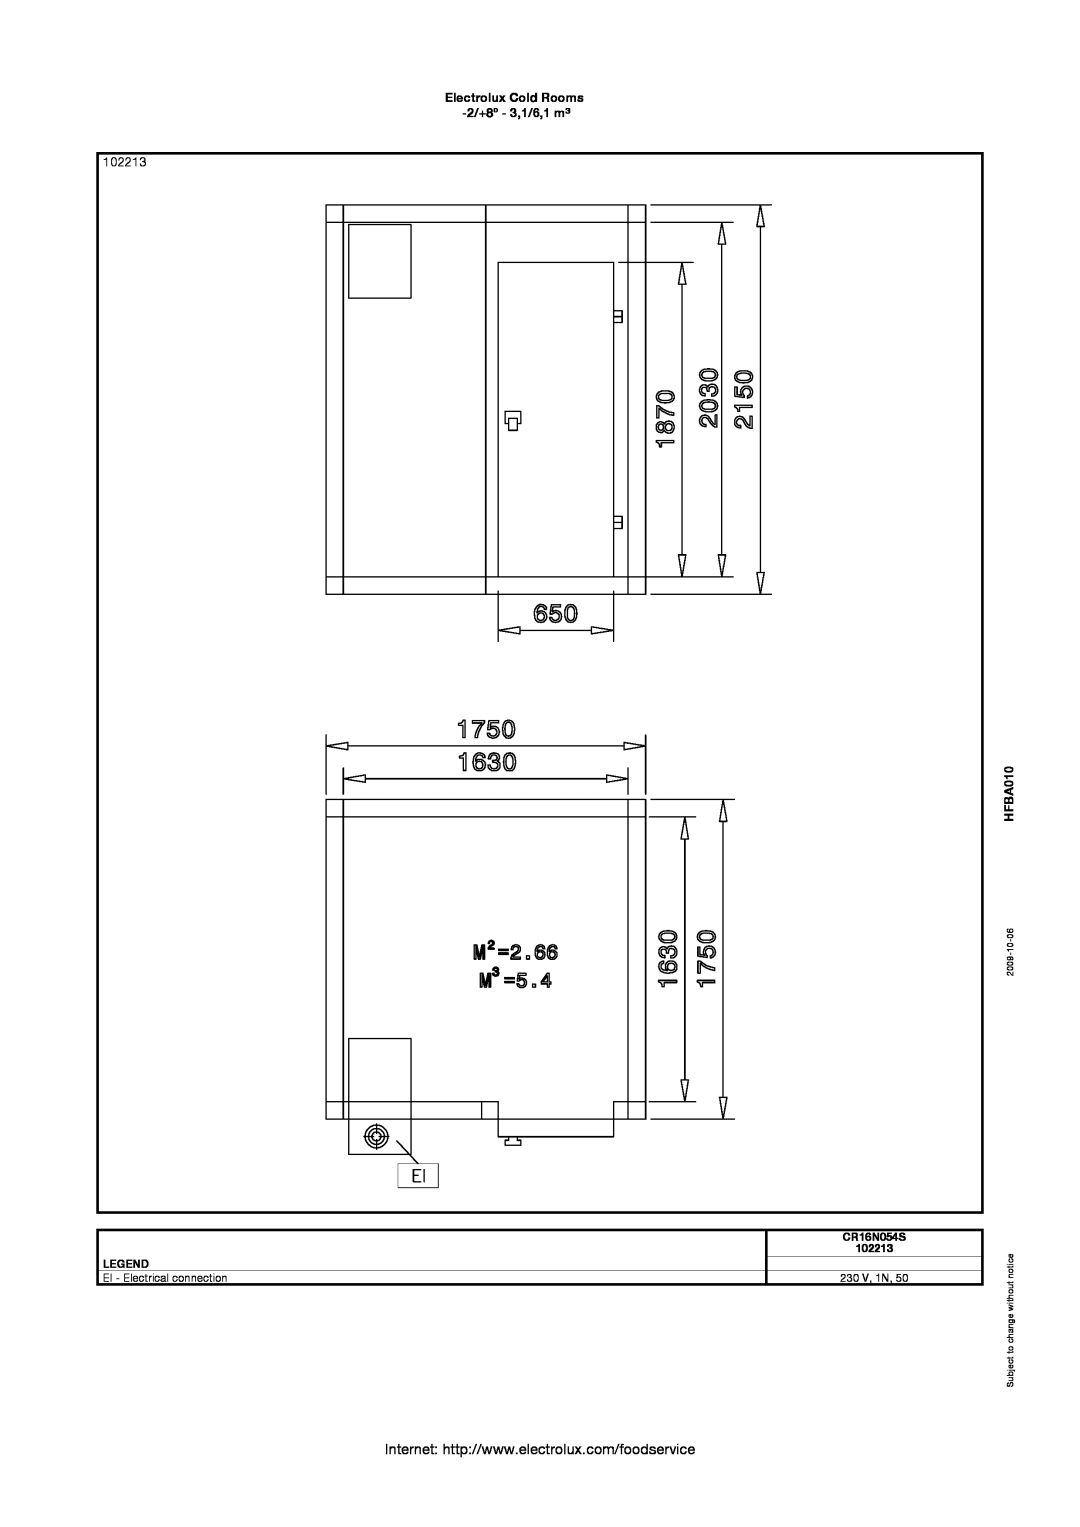 Electrolux 102212 manual 102213, Electrolux Cold Rooms -2/+8º - 3,1/6,1 m³, HFBA010, CR16N054S, EI - Electrical connection 